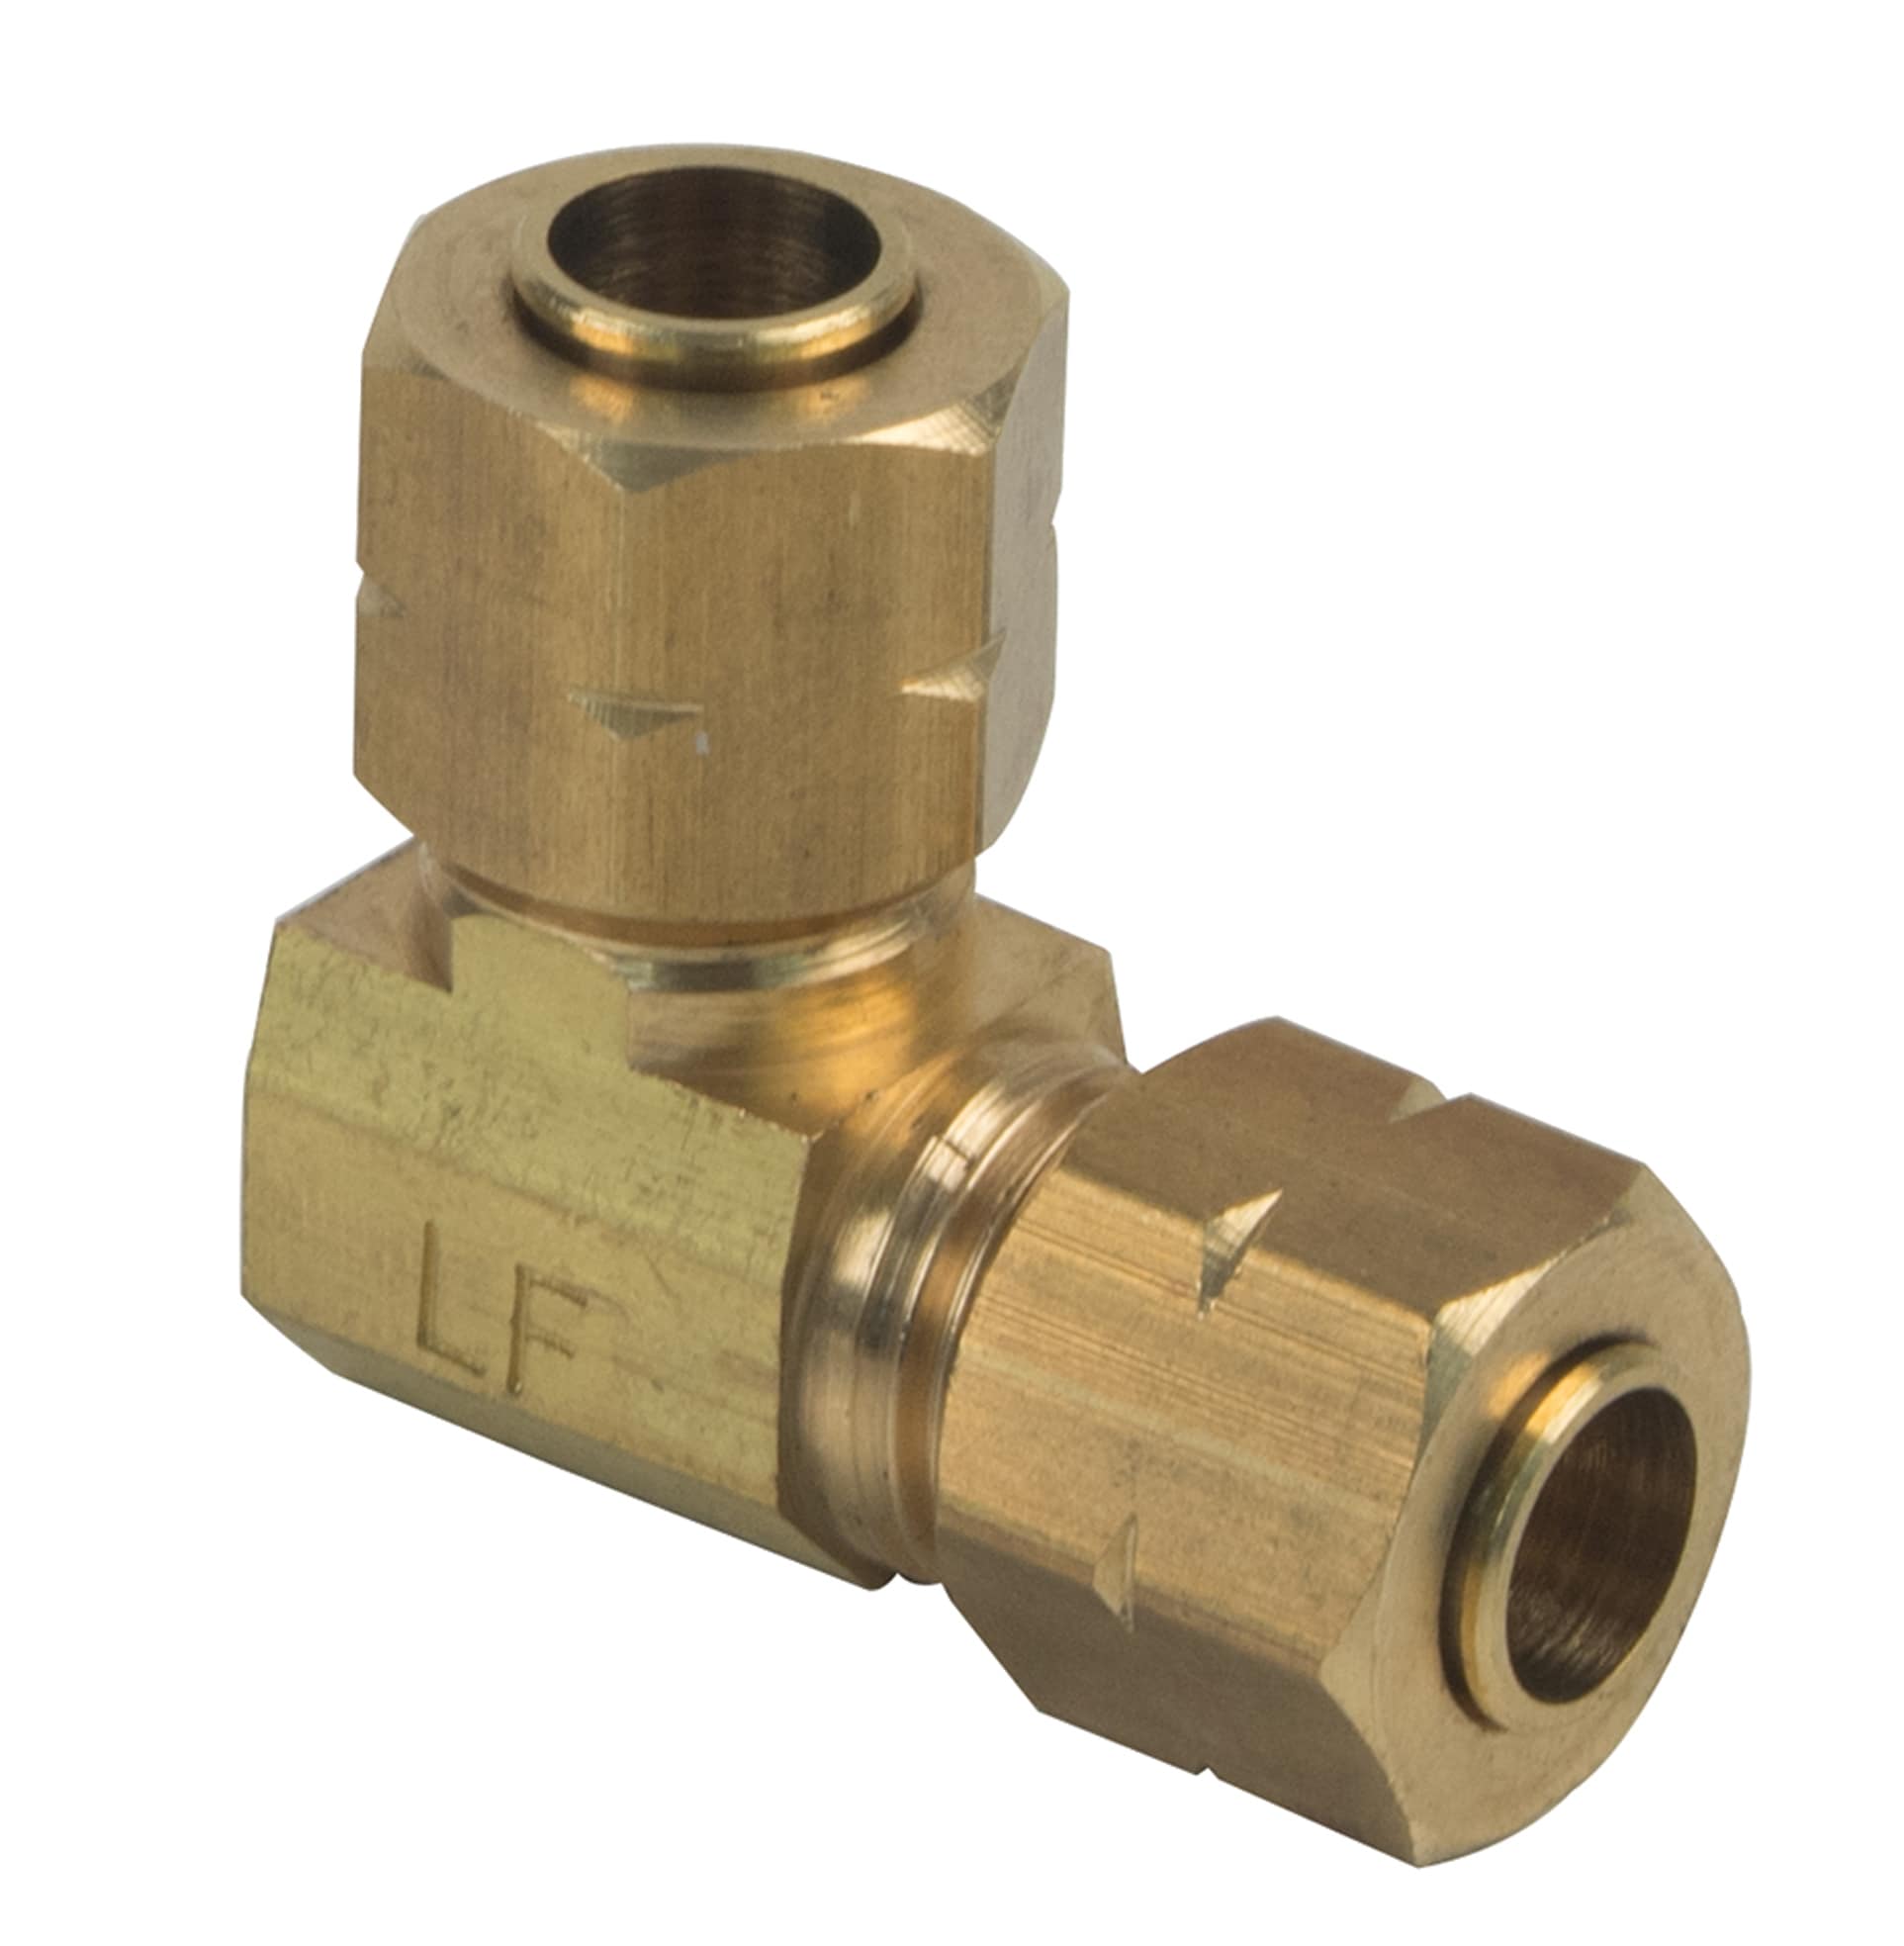 Elbow compression ring fitting G 3/8-10 (M16x1.5)mm, brass